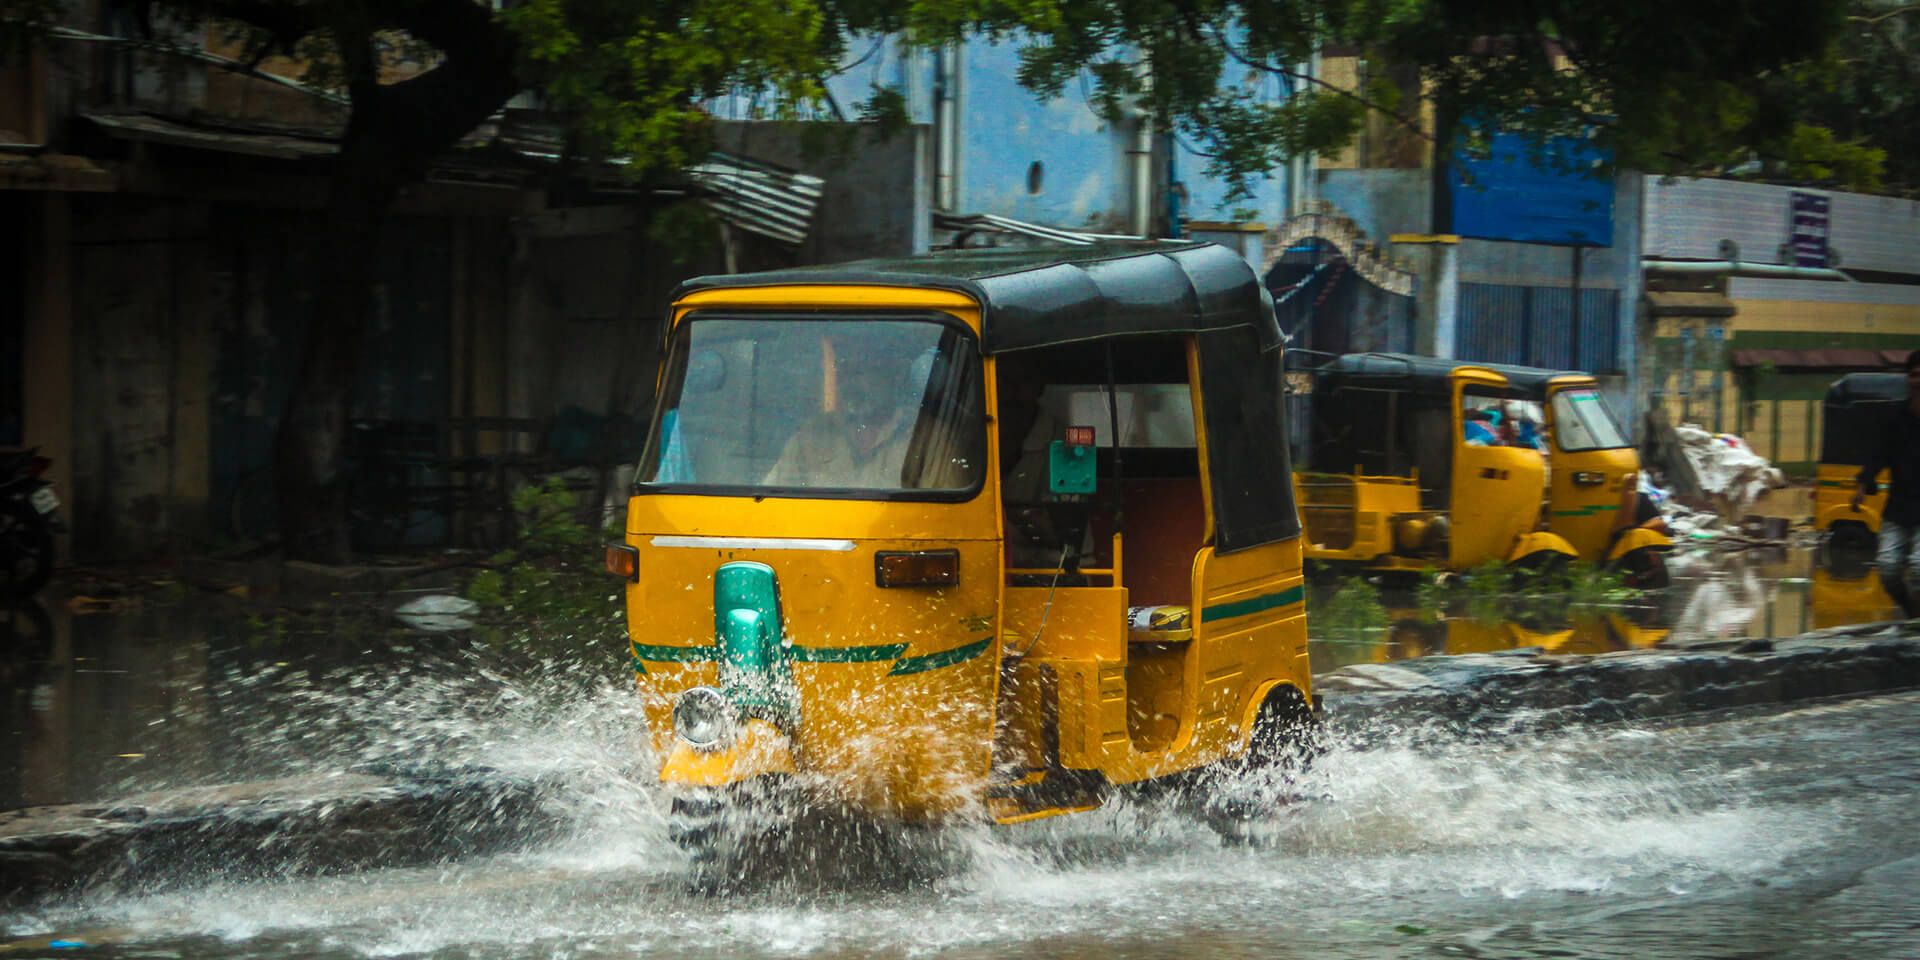 Decorative photo showing a tuk tuk driving through a flooded street